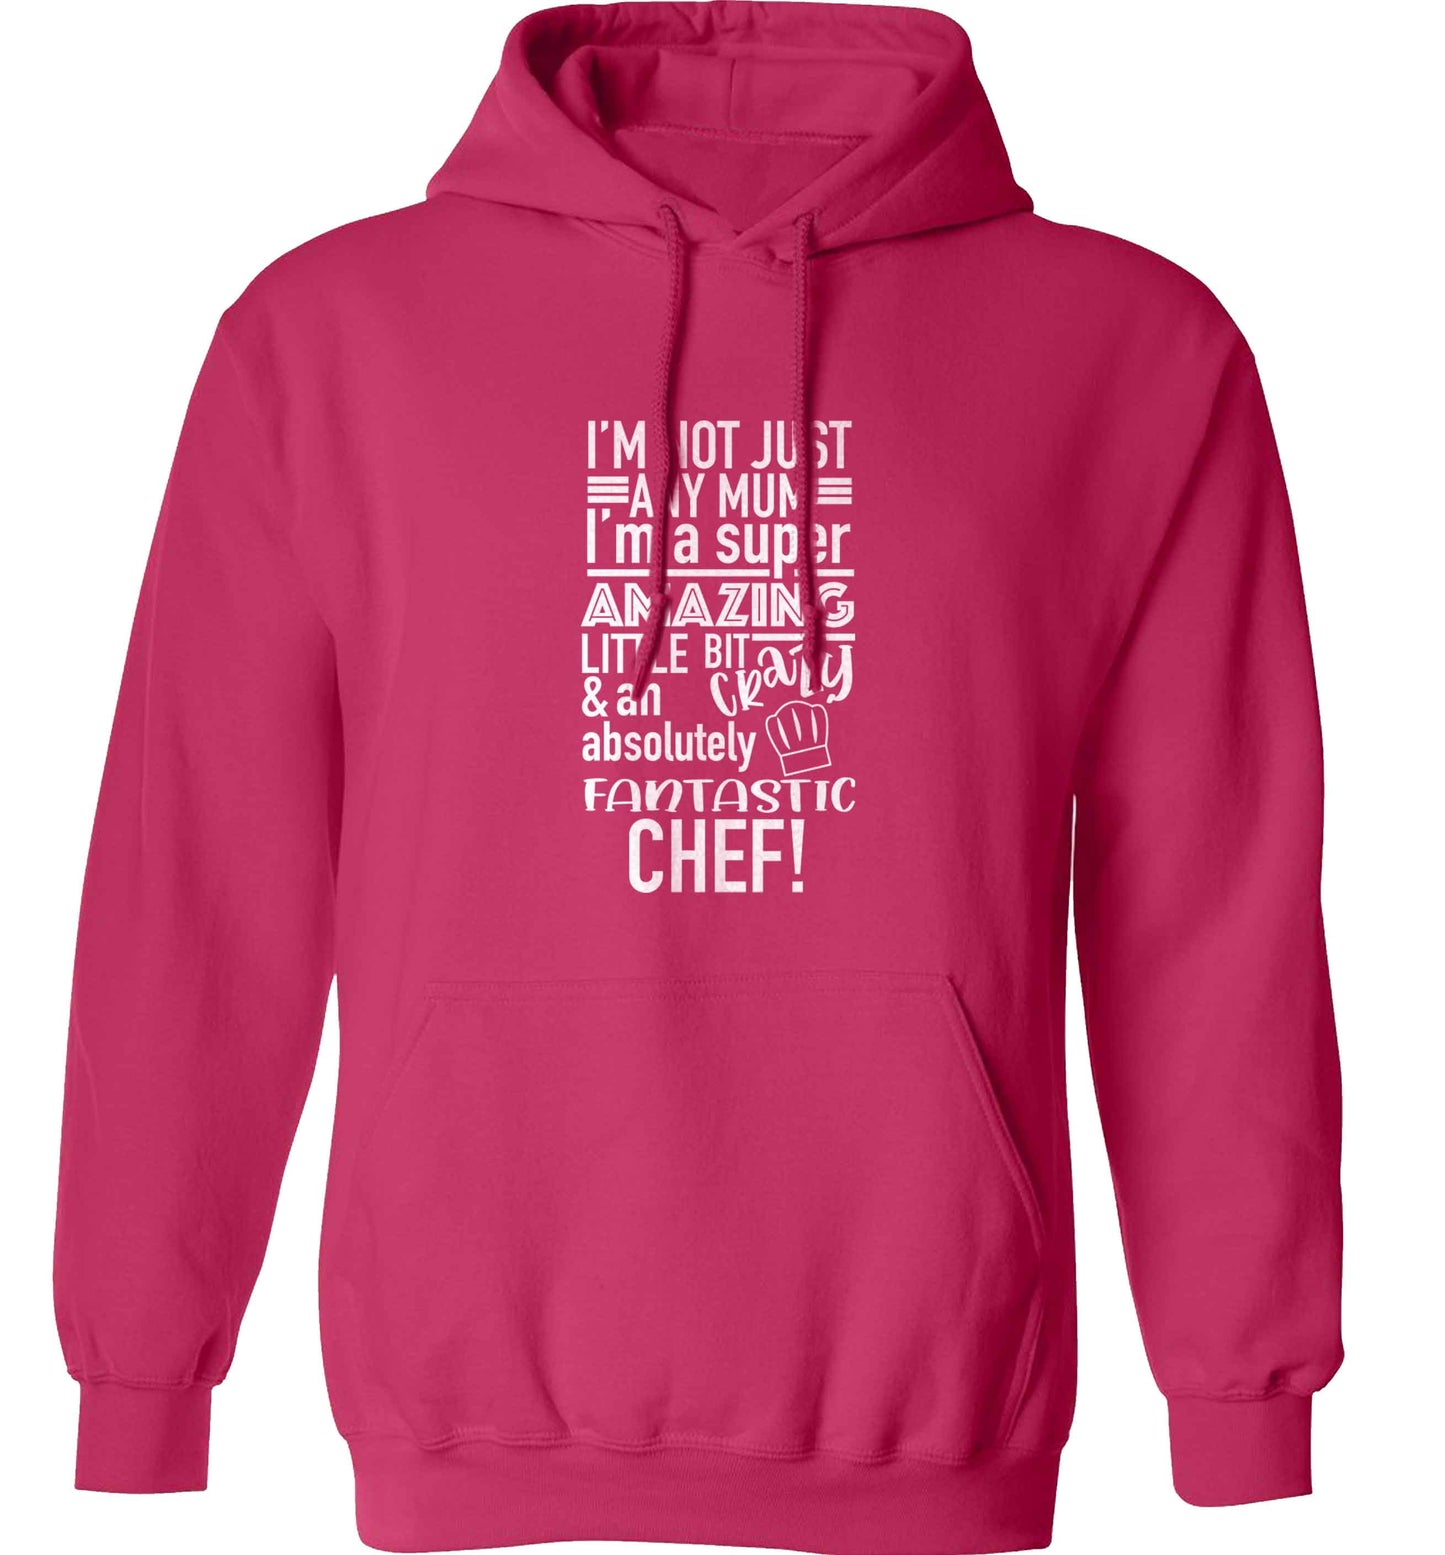 I'm not just any mum I'm a super amazing little bit crazy and an absolutely fantastic chef! adults unisex pink hoodie 2XL